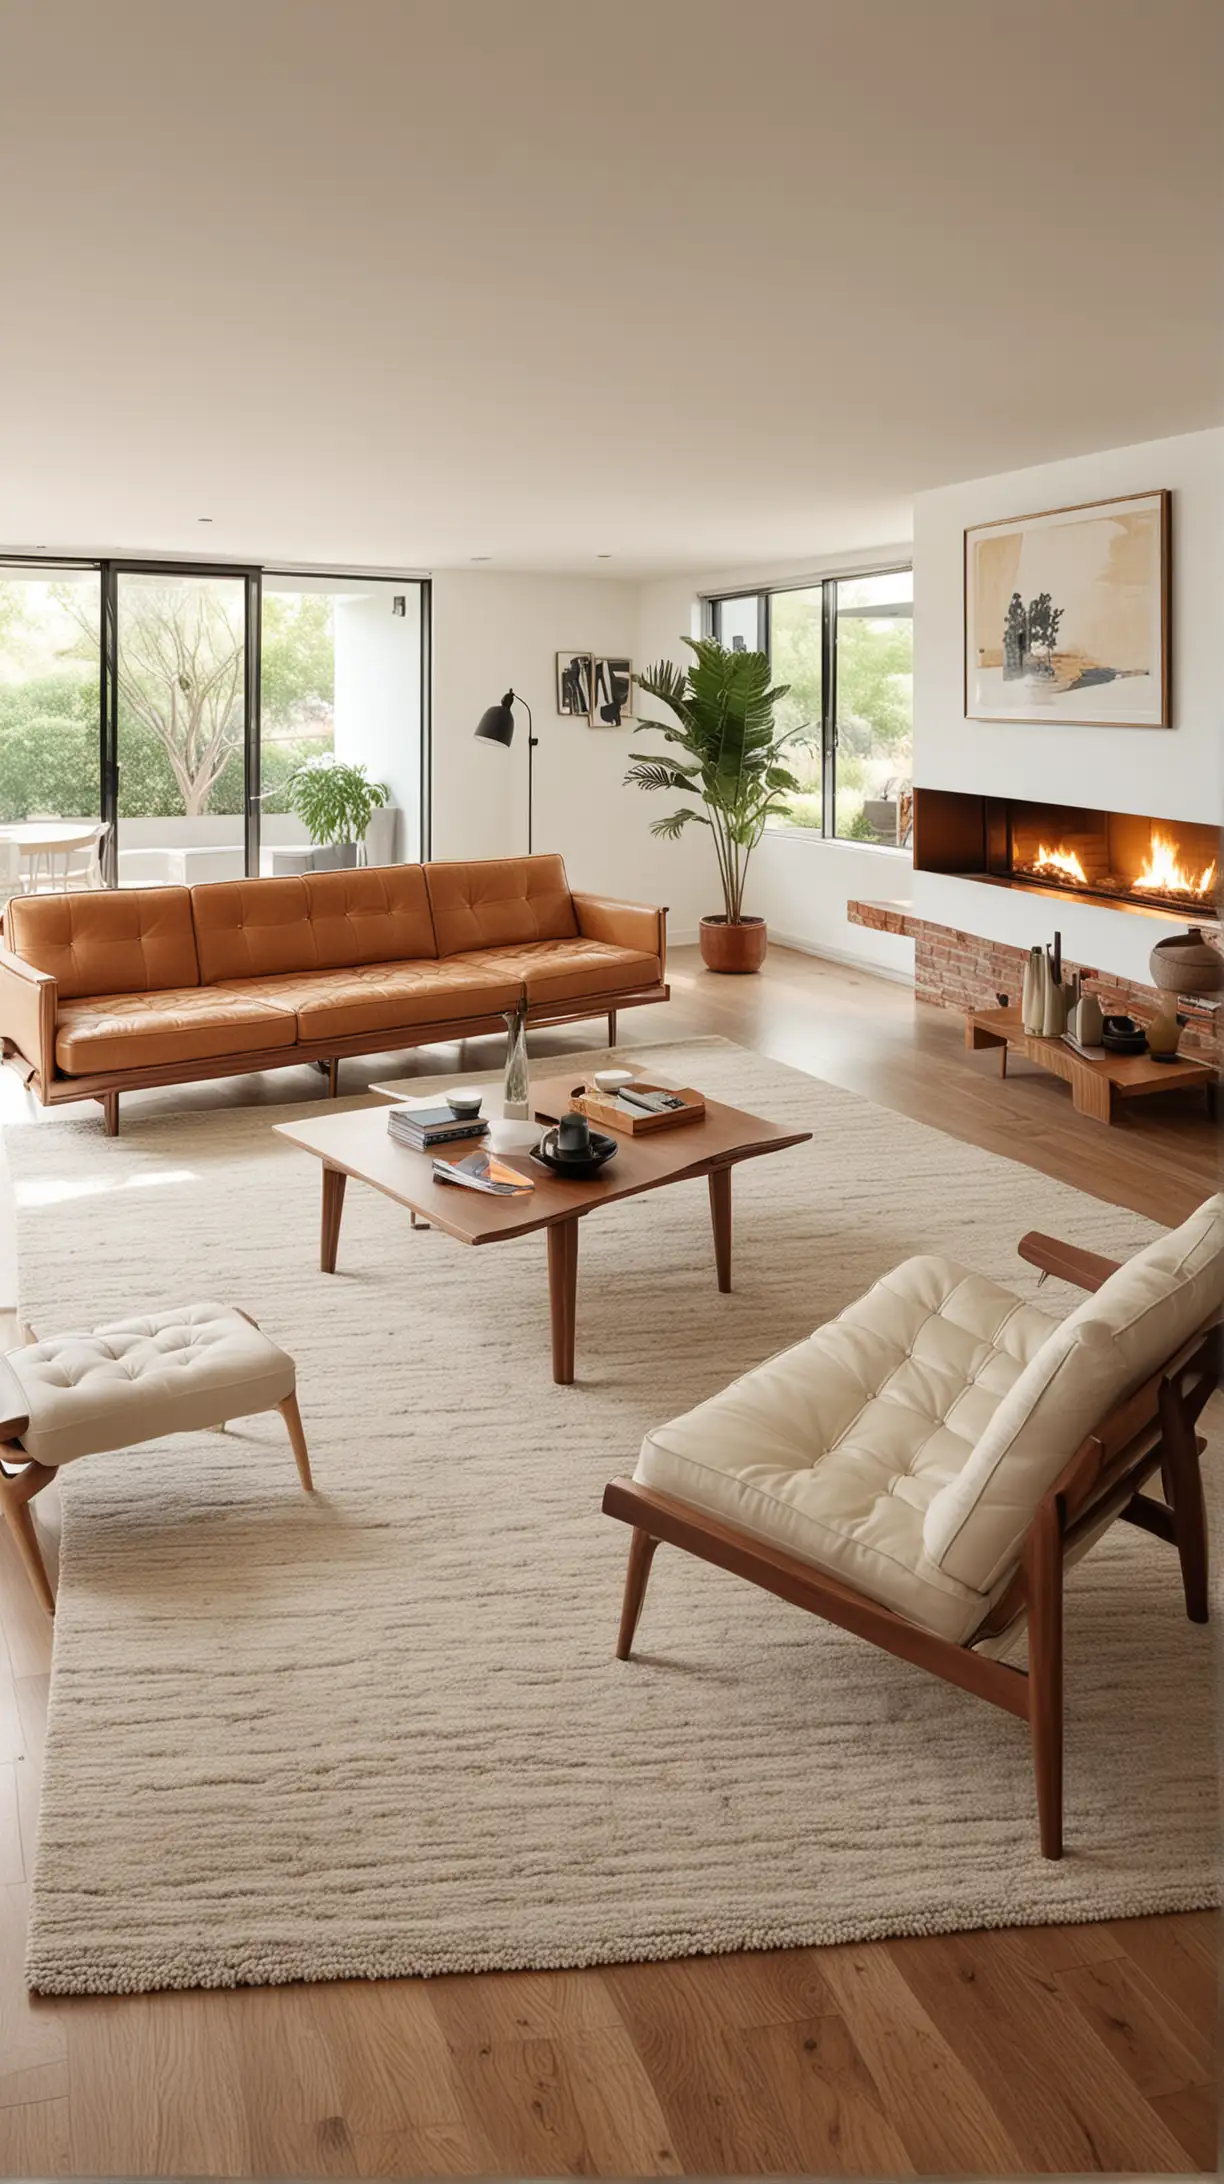 A sleek and stylish midcentury modern living room featuring low-profile furniture with clean lines, minimalist design, and neutral colors.